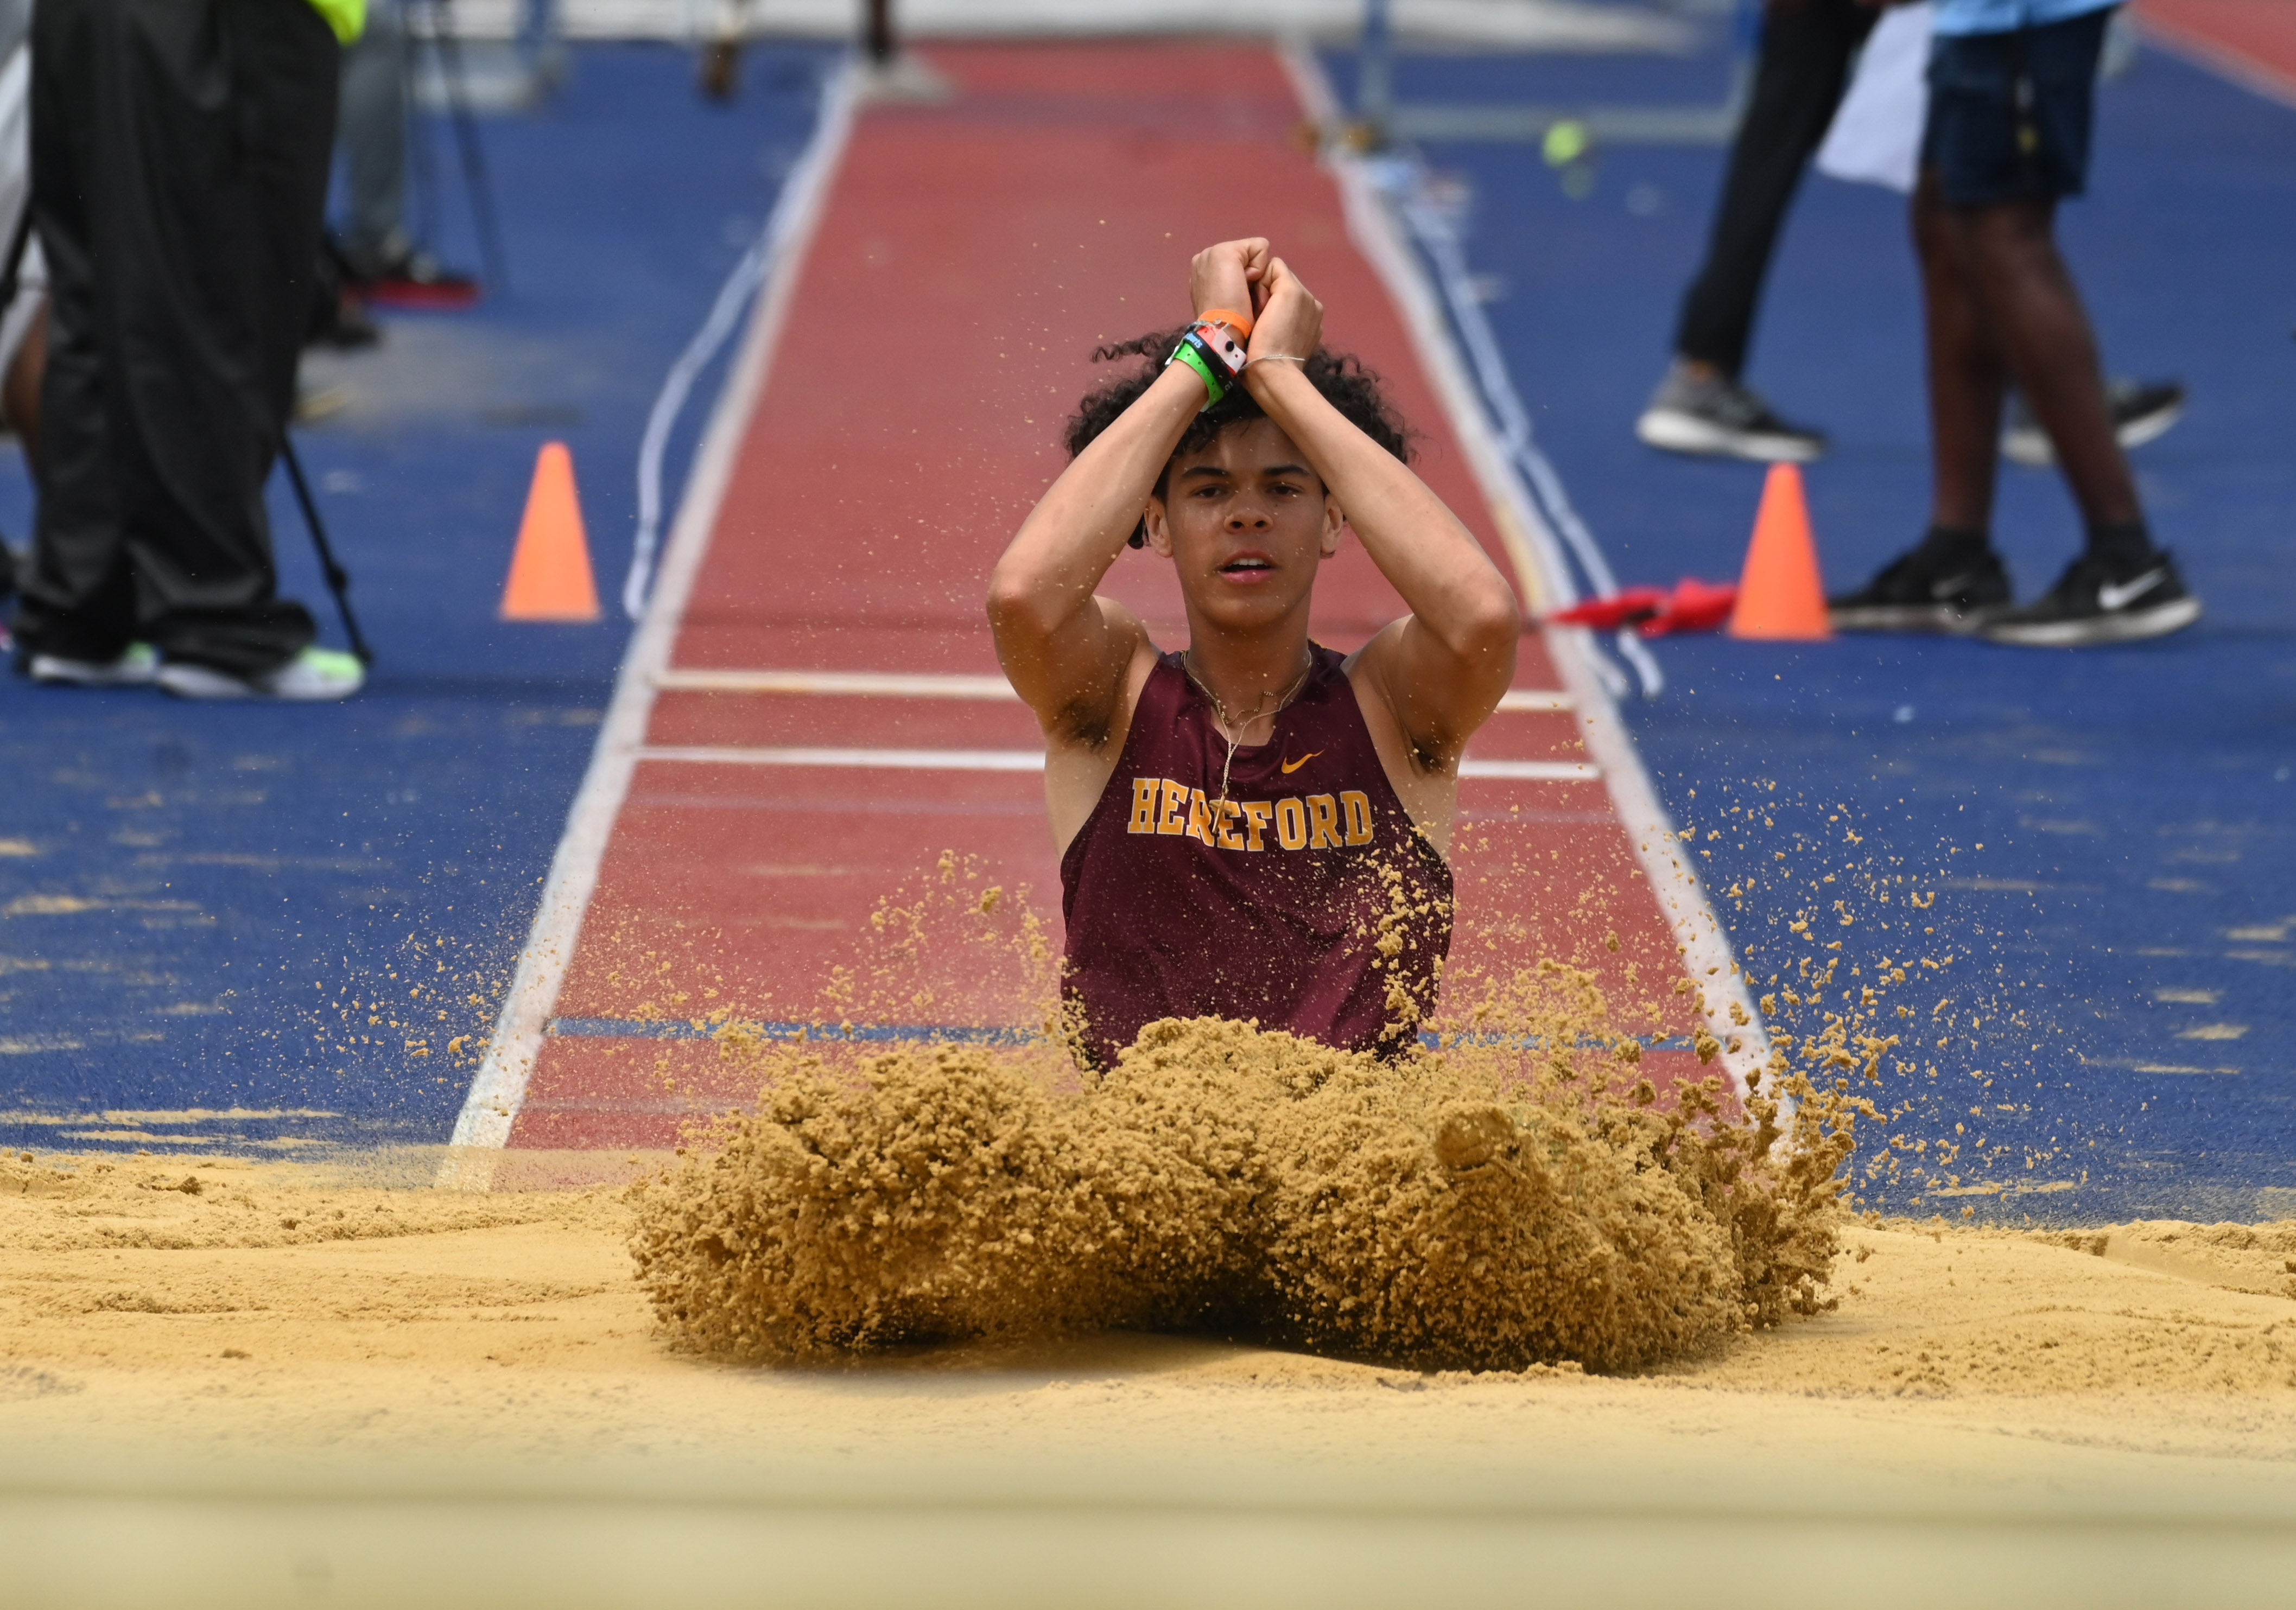 Hereford's Jadon Gaines competes in the 2A boys triple jump during the MPSSAA Track and Field State Championships at Prince George's Sports and Learning Complex on Thursday. (Brian Krista/staff photo)